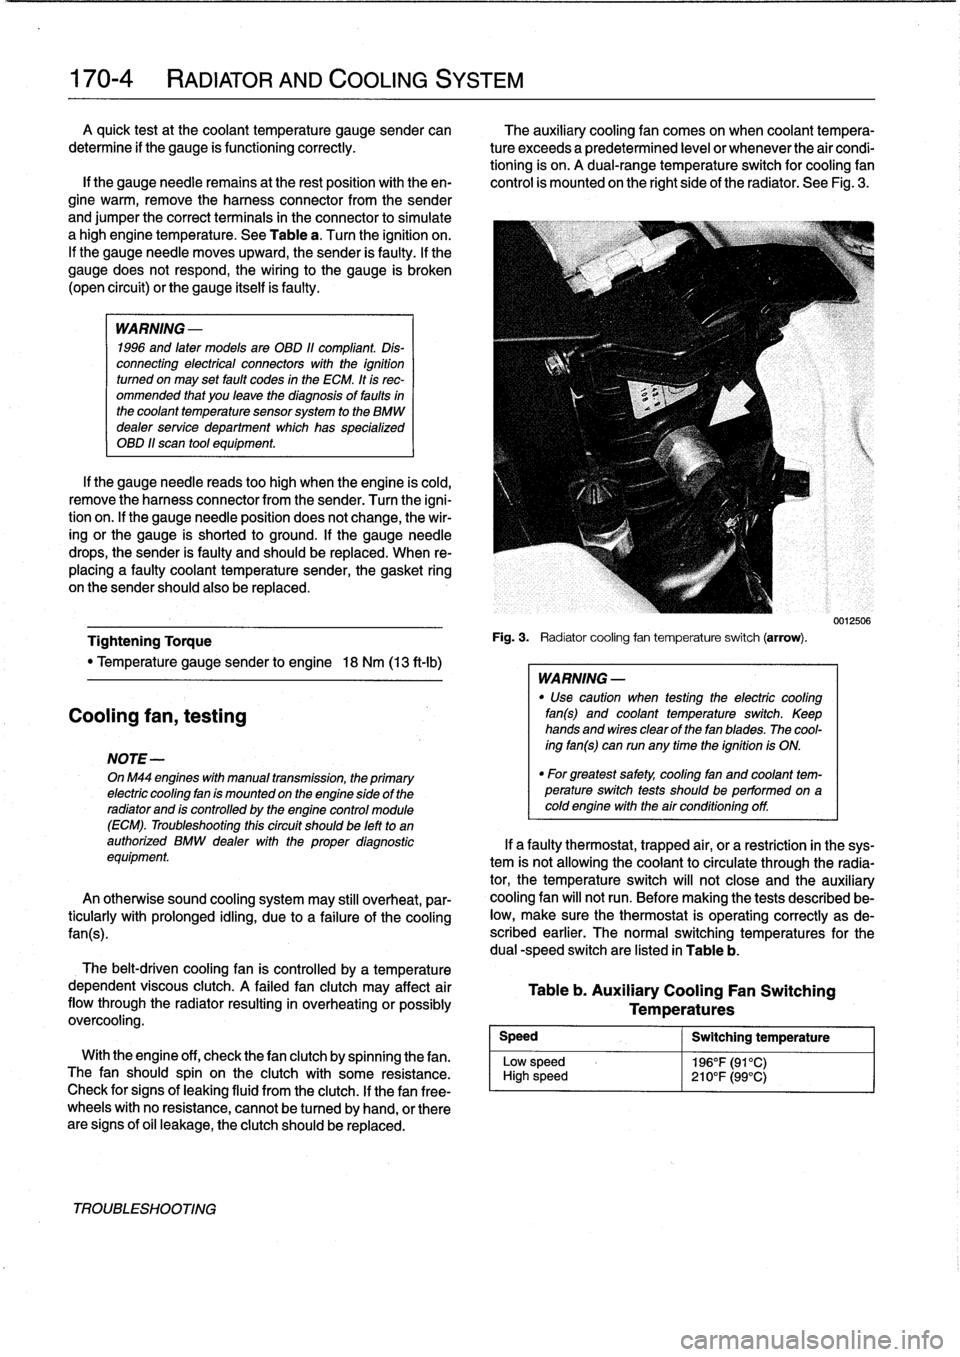 BMW 318i 1998 E36 Workshop Manual 
170-
4

	

RADIATOR
AND
COOLING
SYSTEM
A
quick
testat
the
coolant
temperature
gauge
sender
can

	

The
auxiliary
cooling
fan
comes
on
when
coolant
tempera

determine
if
the
gauge
is
functioning
corre